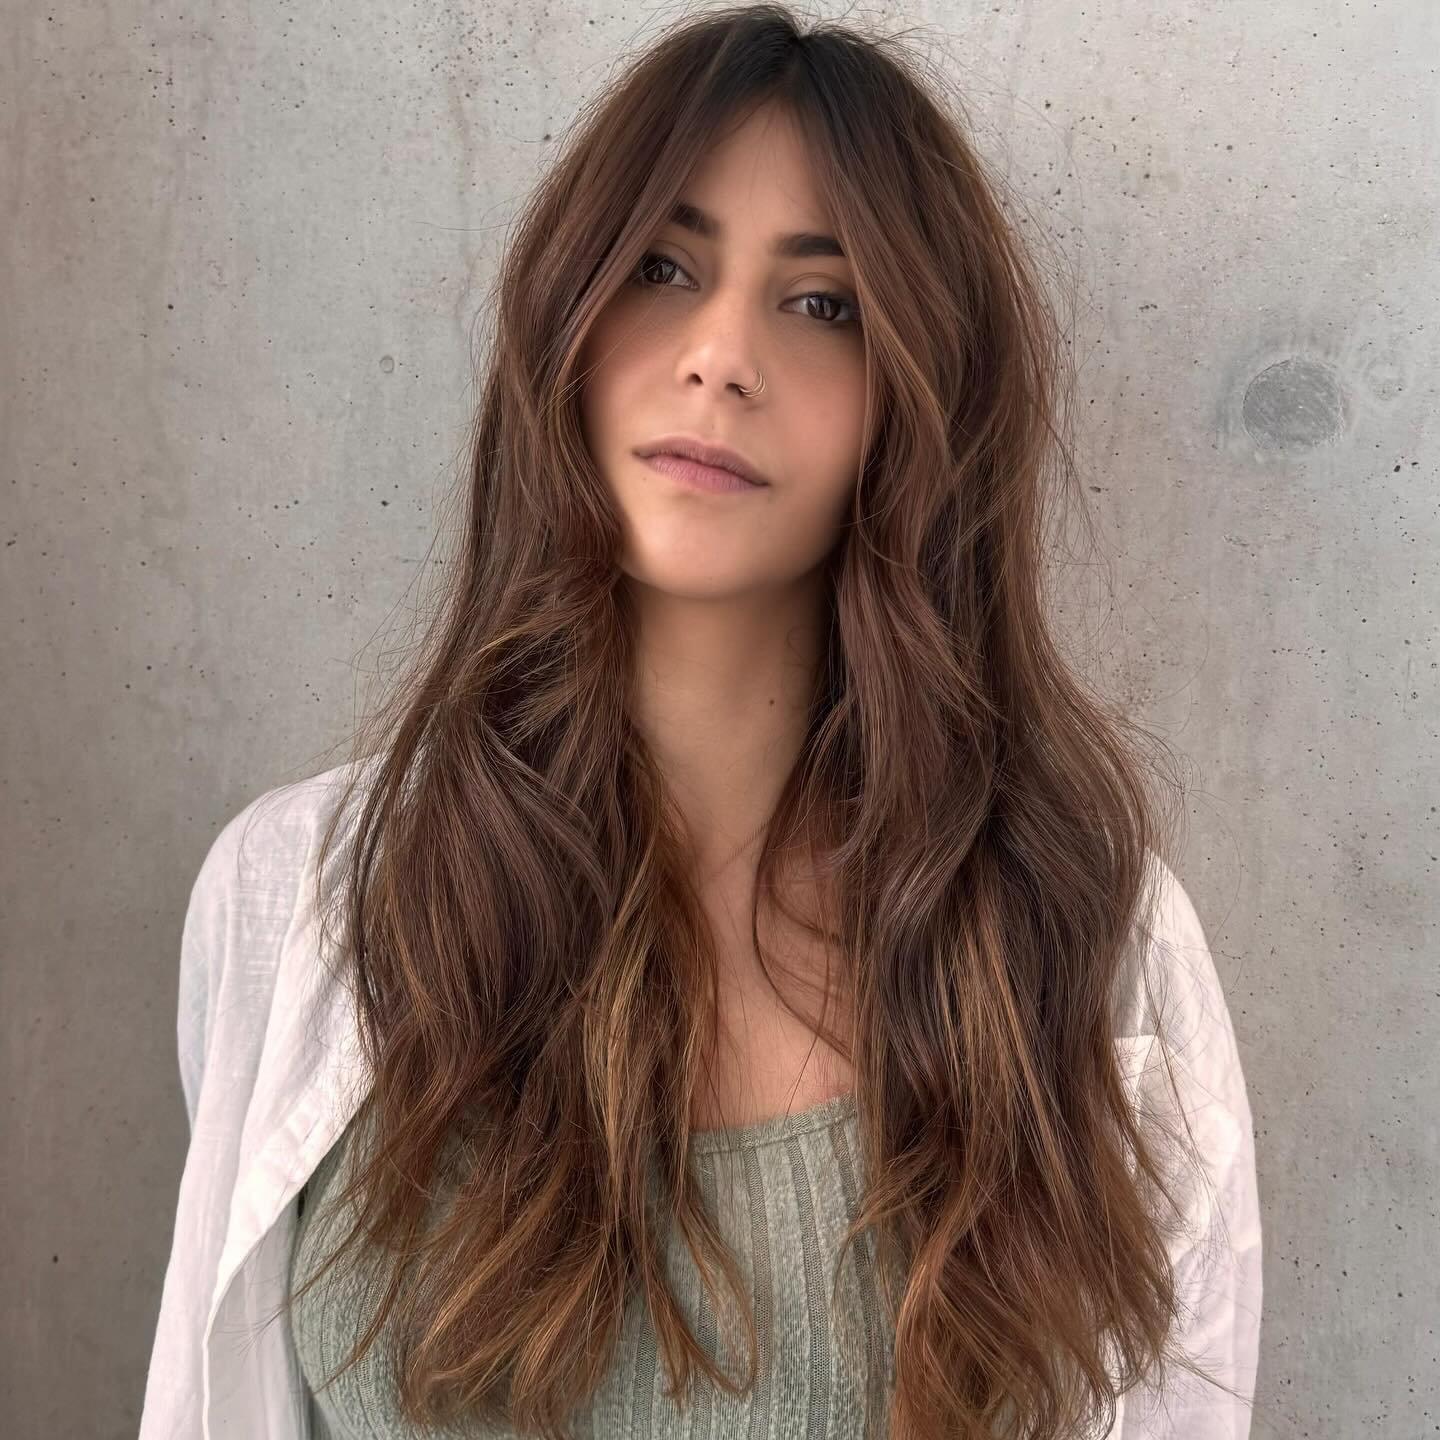 Sun-kissed Balayage. 

Ribbons of freehand Balayage to enhance a natural warm brunette are a match made in hair colour heaven. This kind of colour has subtle beauty, longevity and retains condition. 

The perfect enhancement for summer hair vibes. Ba